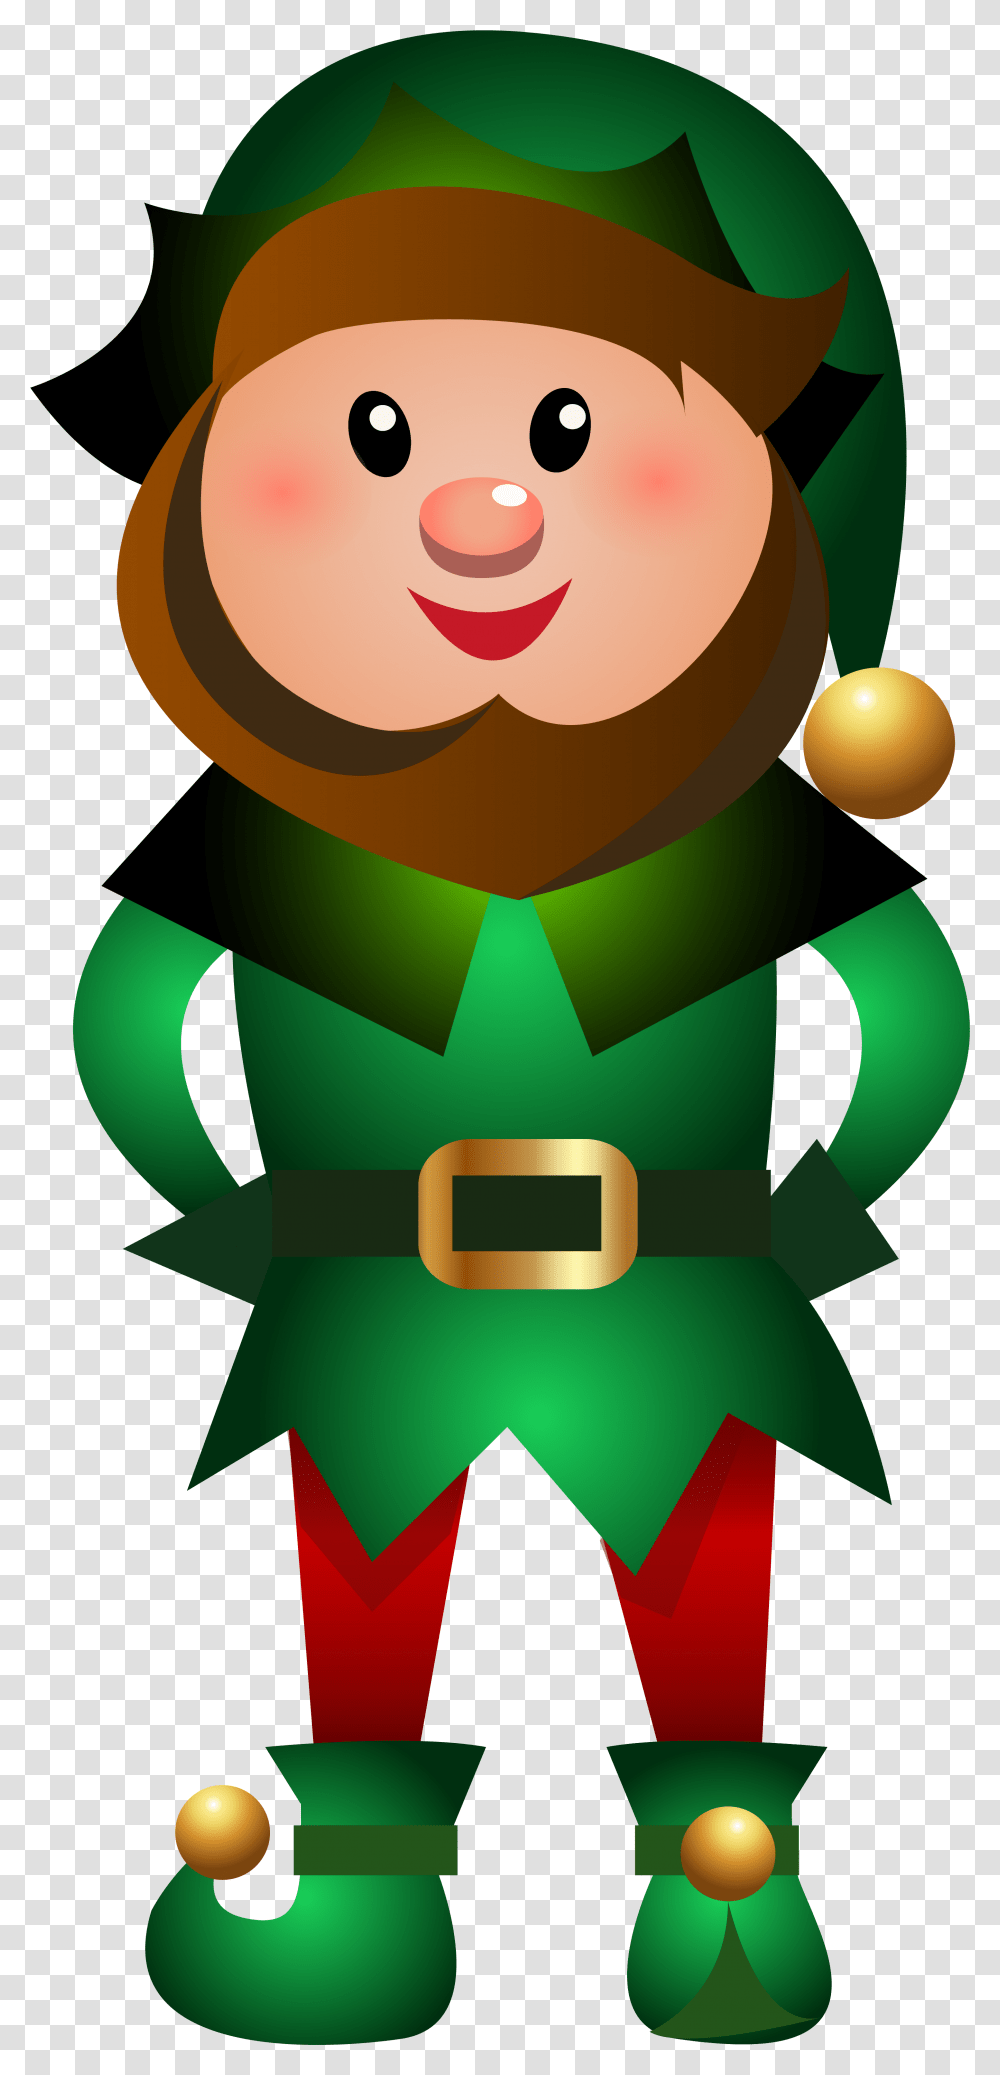 Cartoongreenclip Artfictional Elfchristmas Elf Christmas Images, Accessories, Accessory, Snowman, Winter Transparent Png